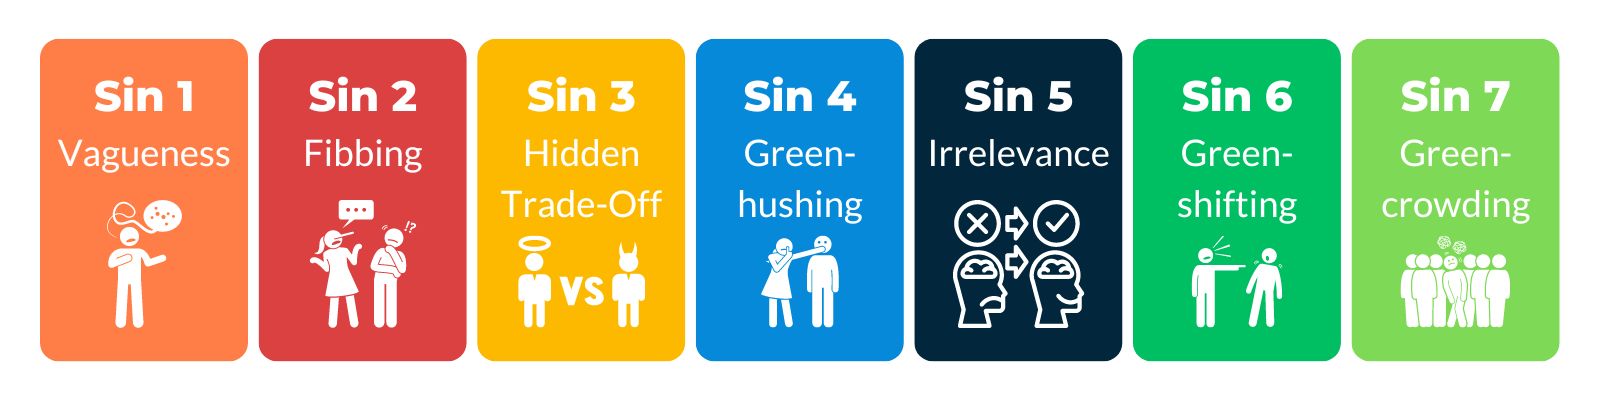 The seven sins of greenwahing - coloured tiles rpresenting each ot the seven sins.